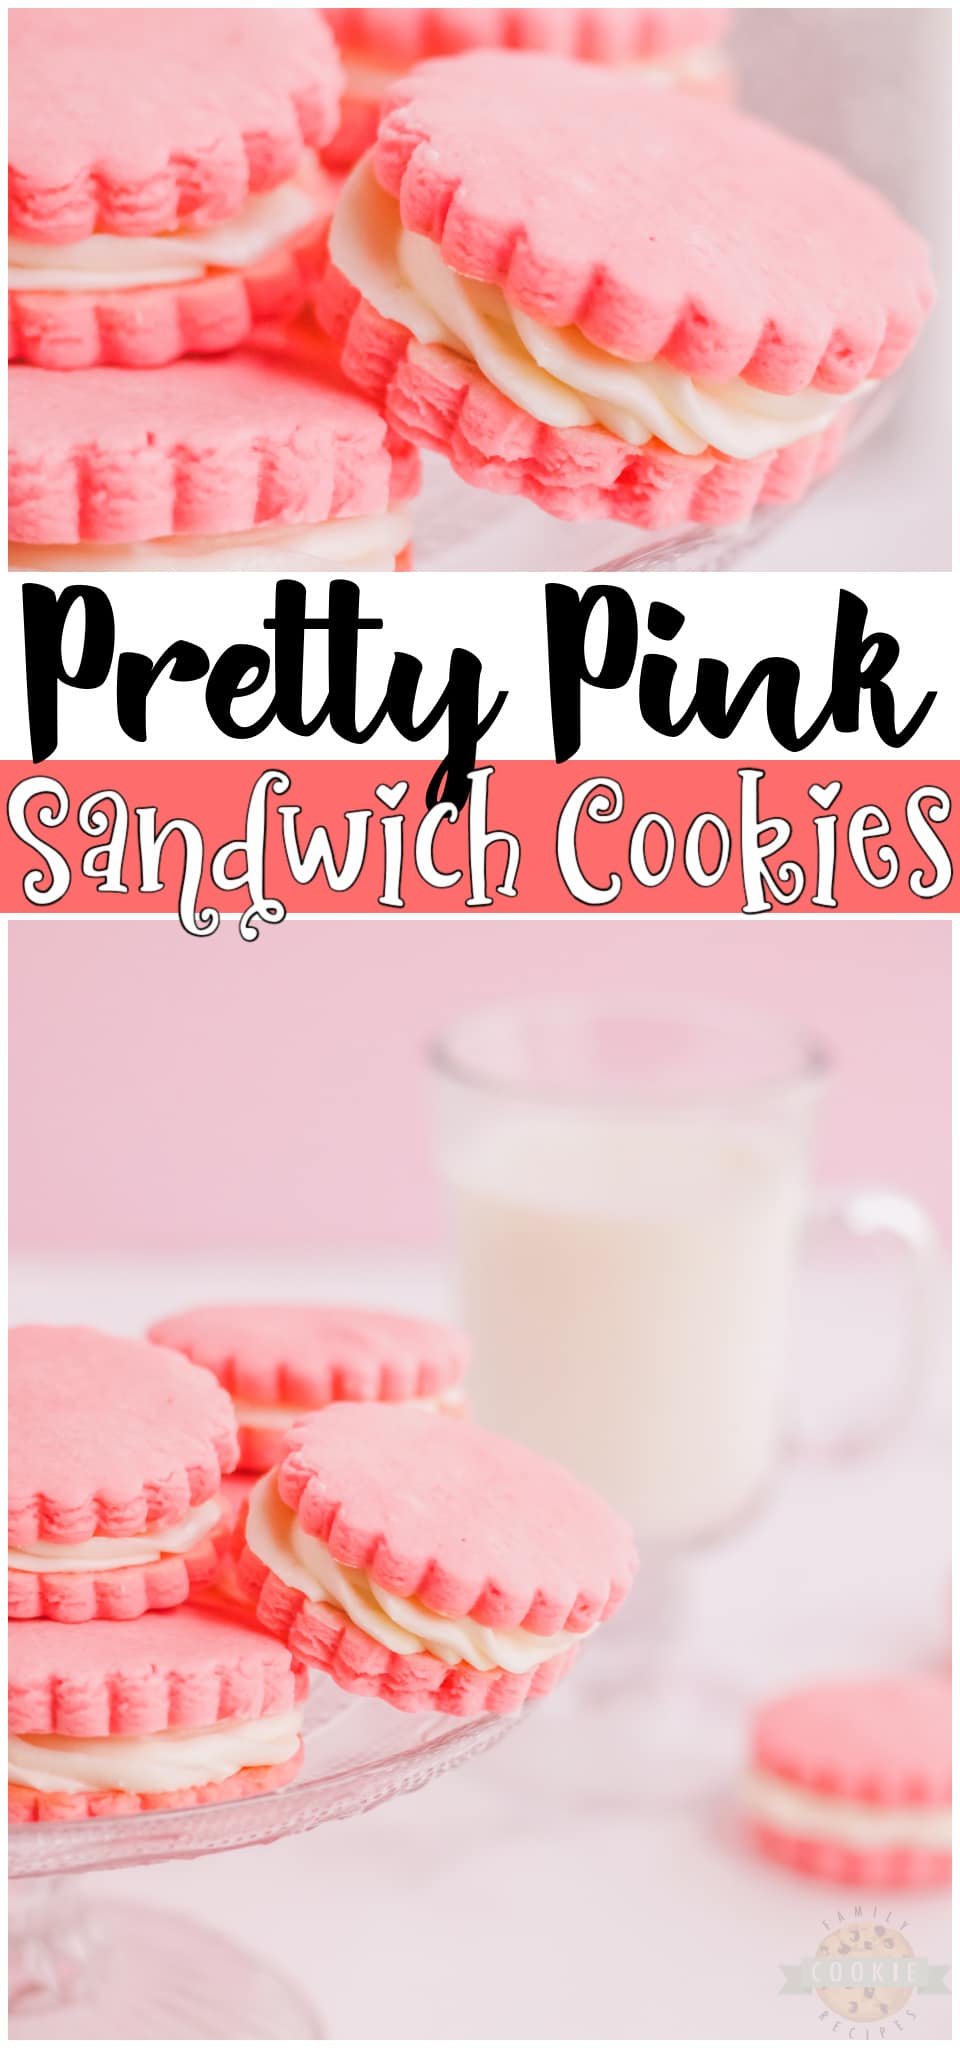 Pretty Pink Sandwich Cookies begin with a fabulous sugar cookie, colored pink for Valentine's Day or any occasion! Two cookies filled with a sweet vanilla buttercream frosting for a lovely treat everyone enjoys! 